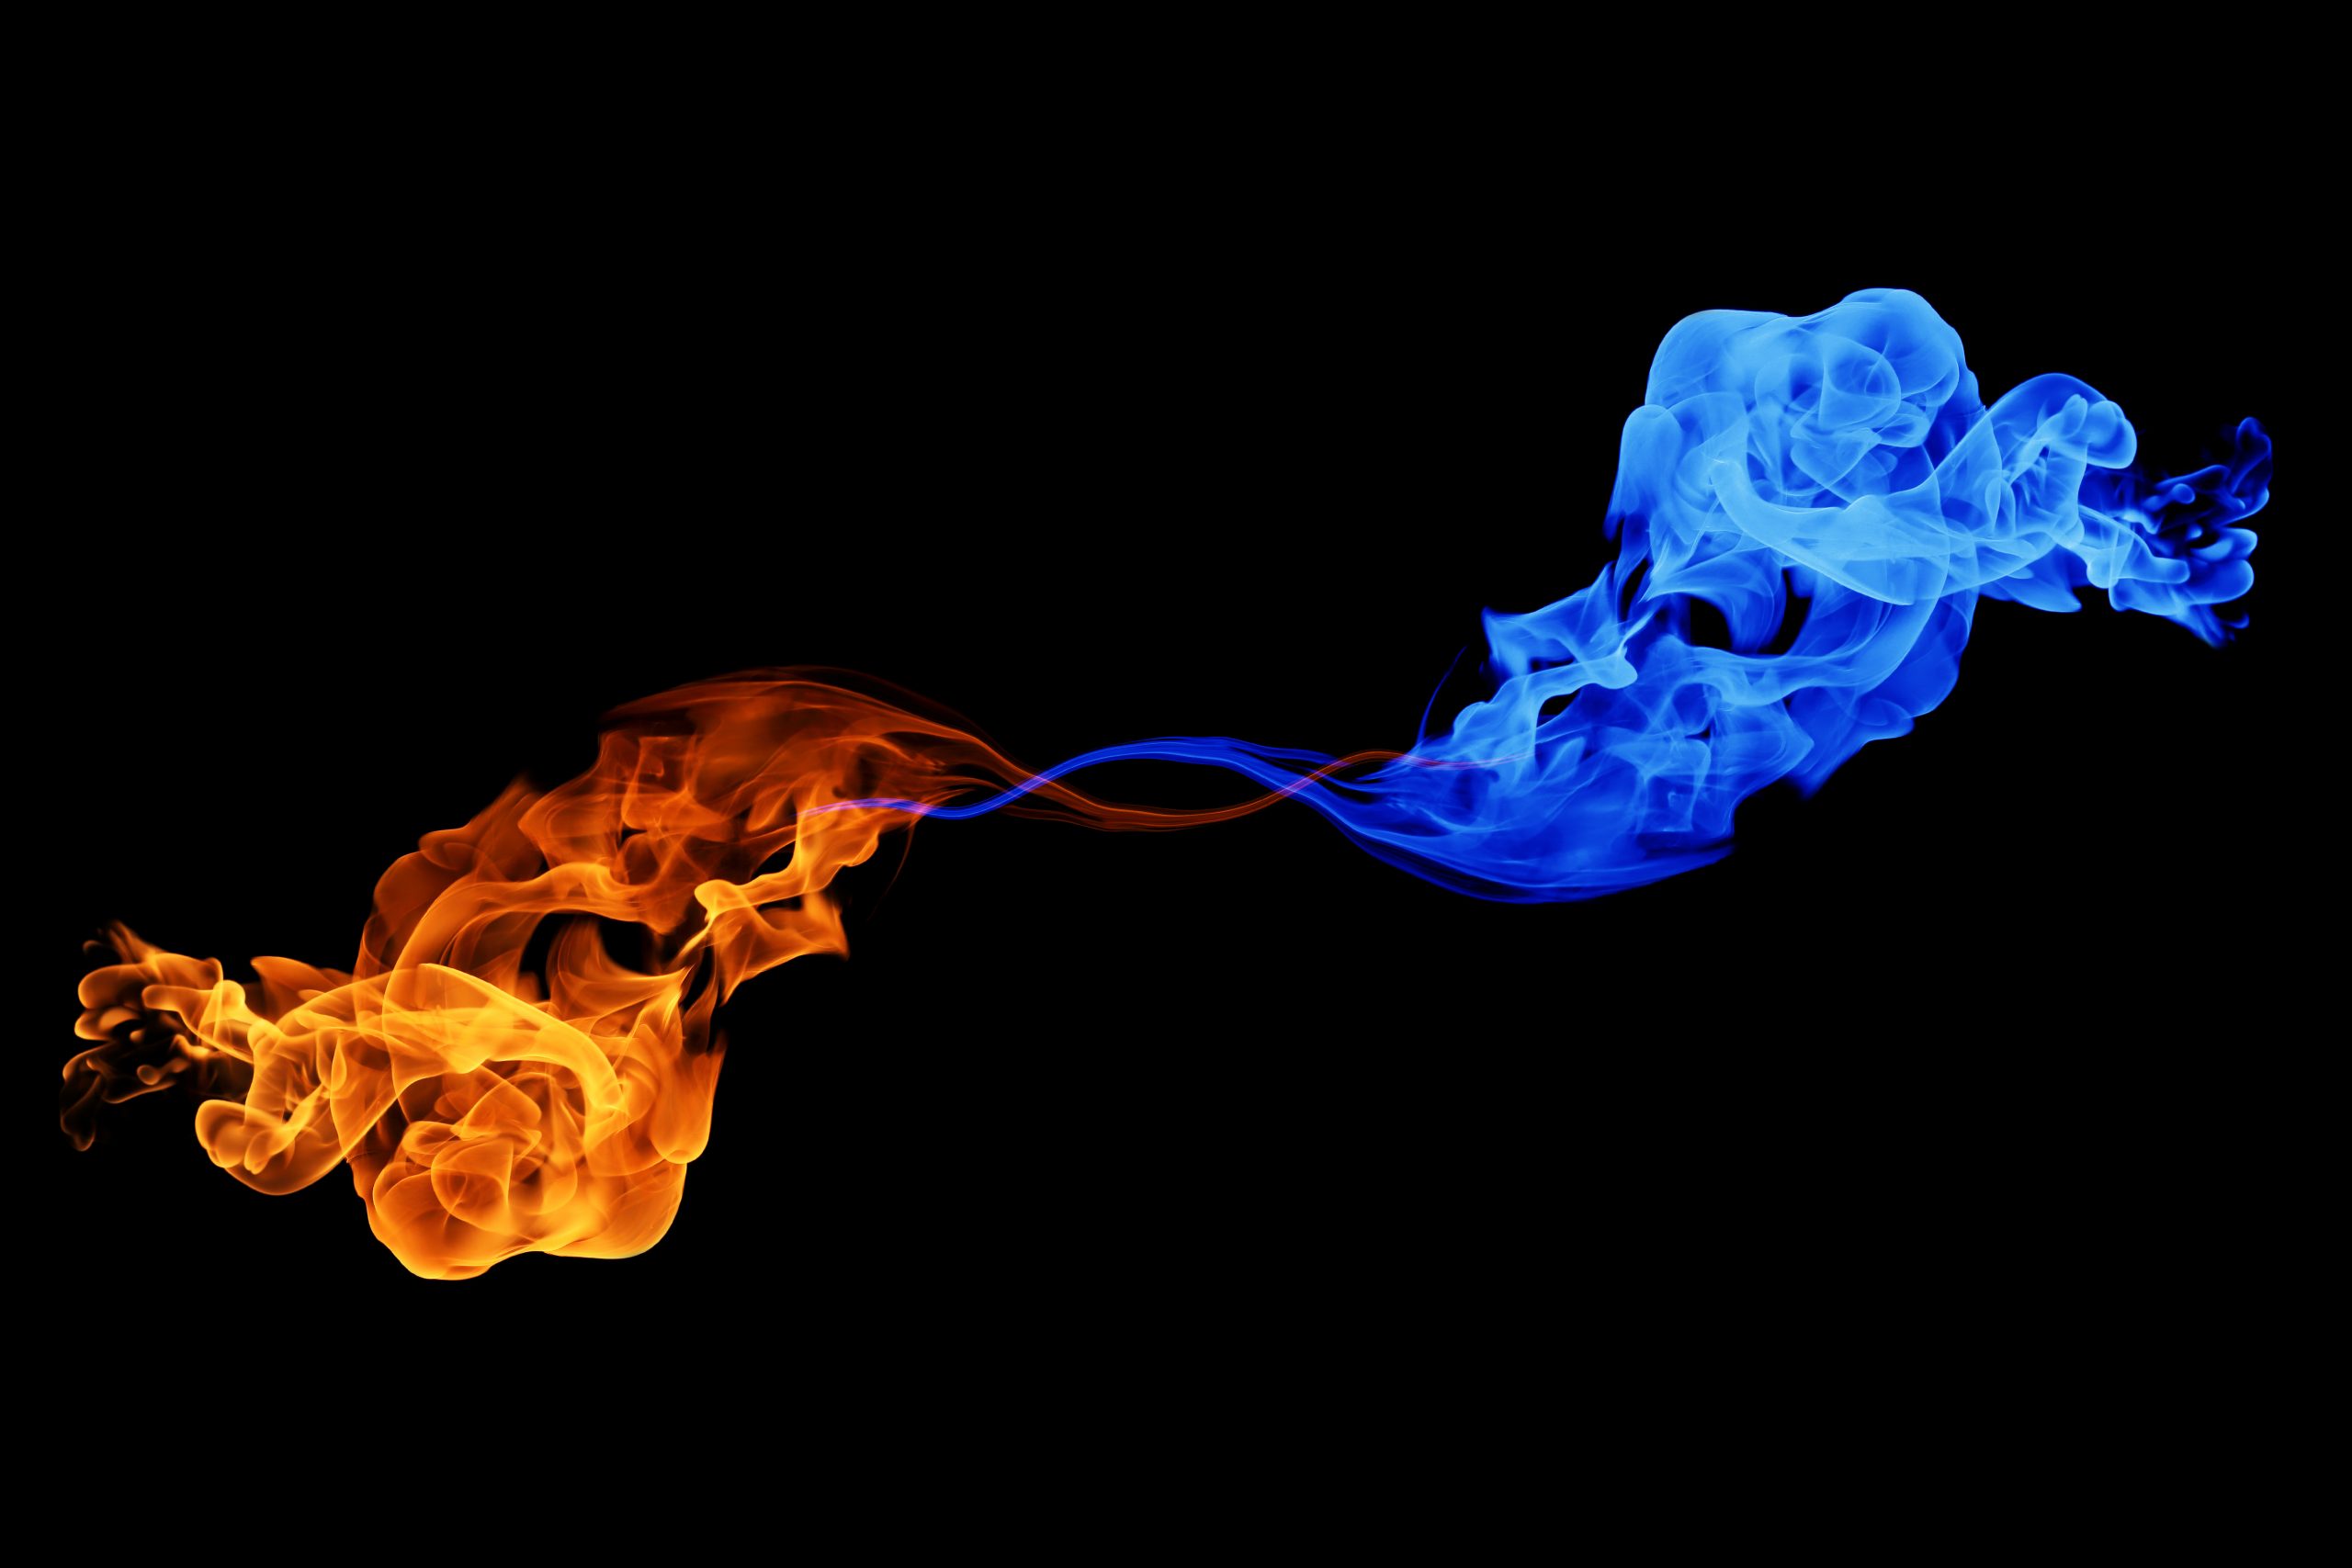 Yin-yang symbol, fire and ice, abstract background